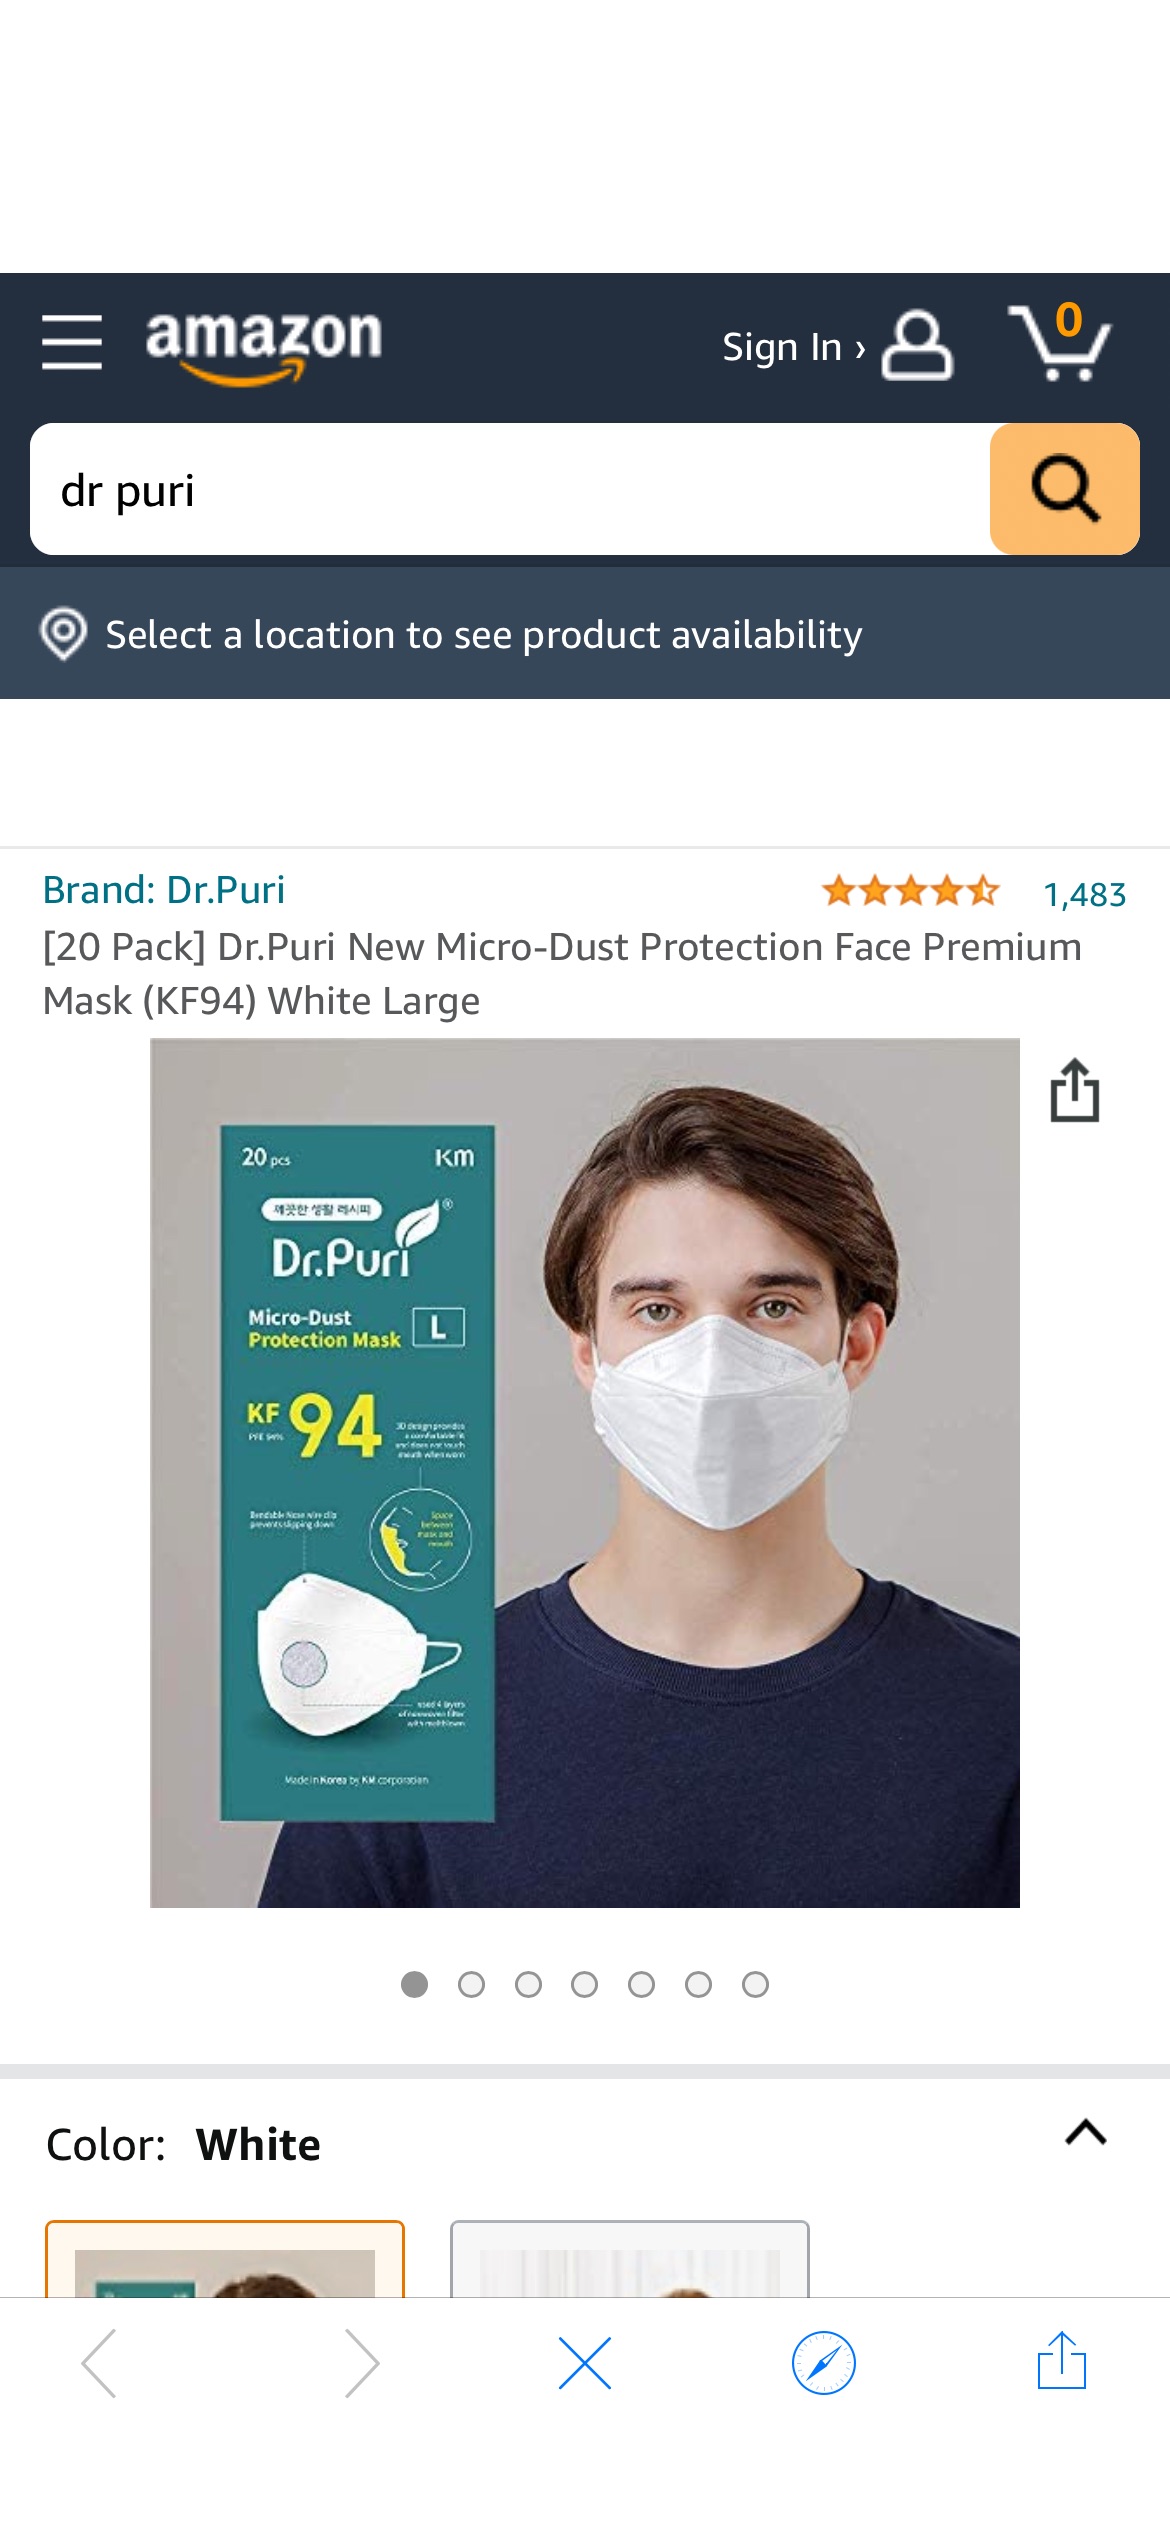 [20 Pack] Dr.Puri New Micro-Dust Protection Face Premium Mask (KF94) White Large - - Amazon.com 韩国KF94口罩半价